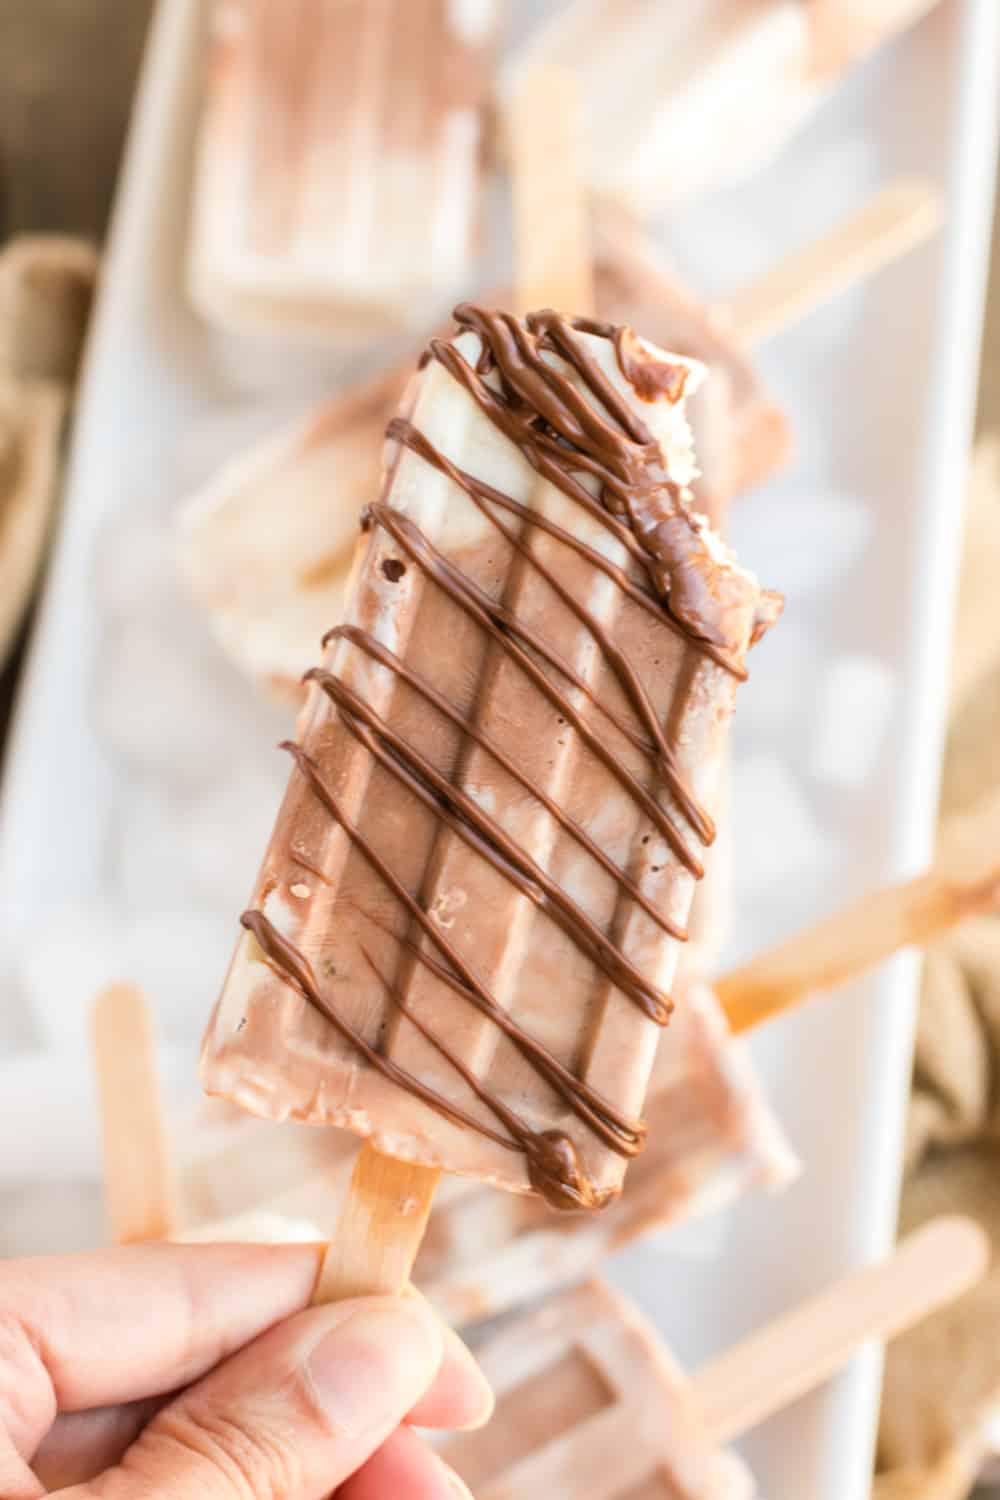 A swirled banana popsicle drizzled with Nutella with a bite taken out.